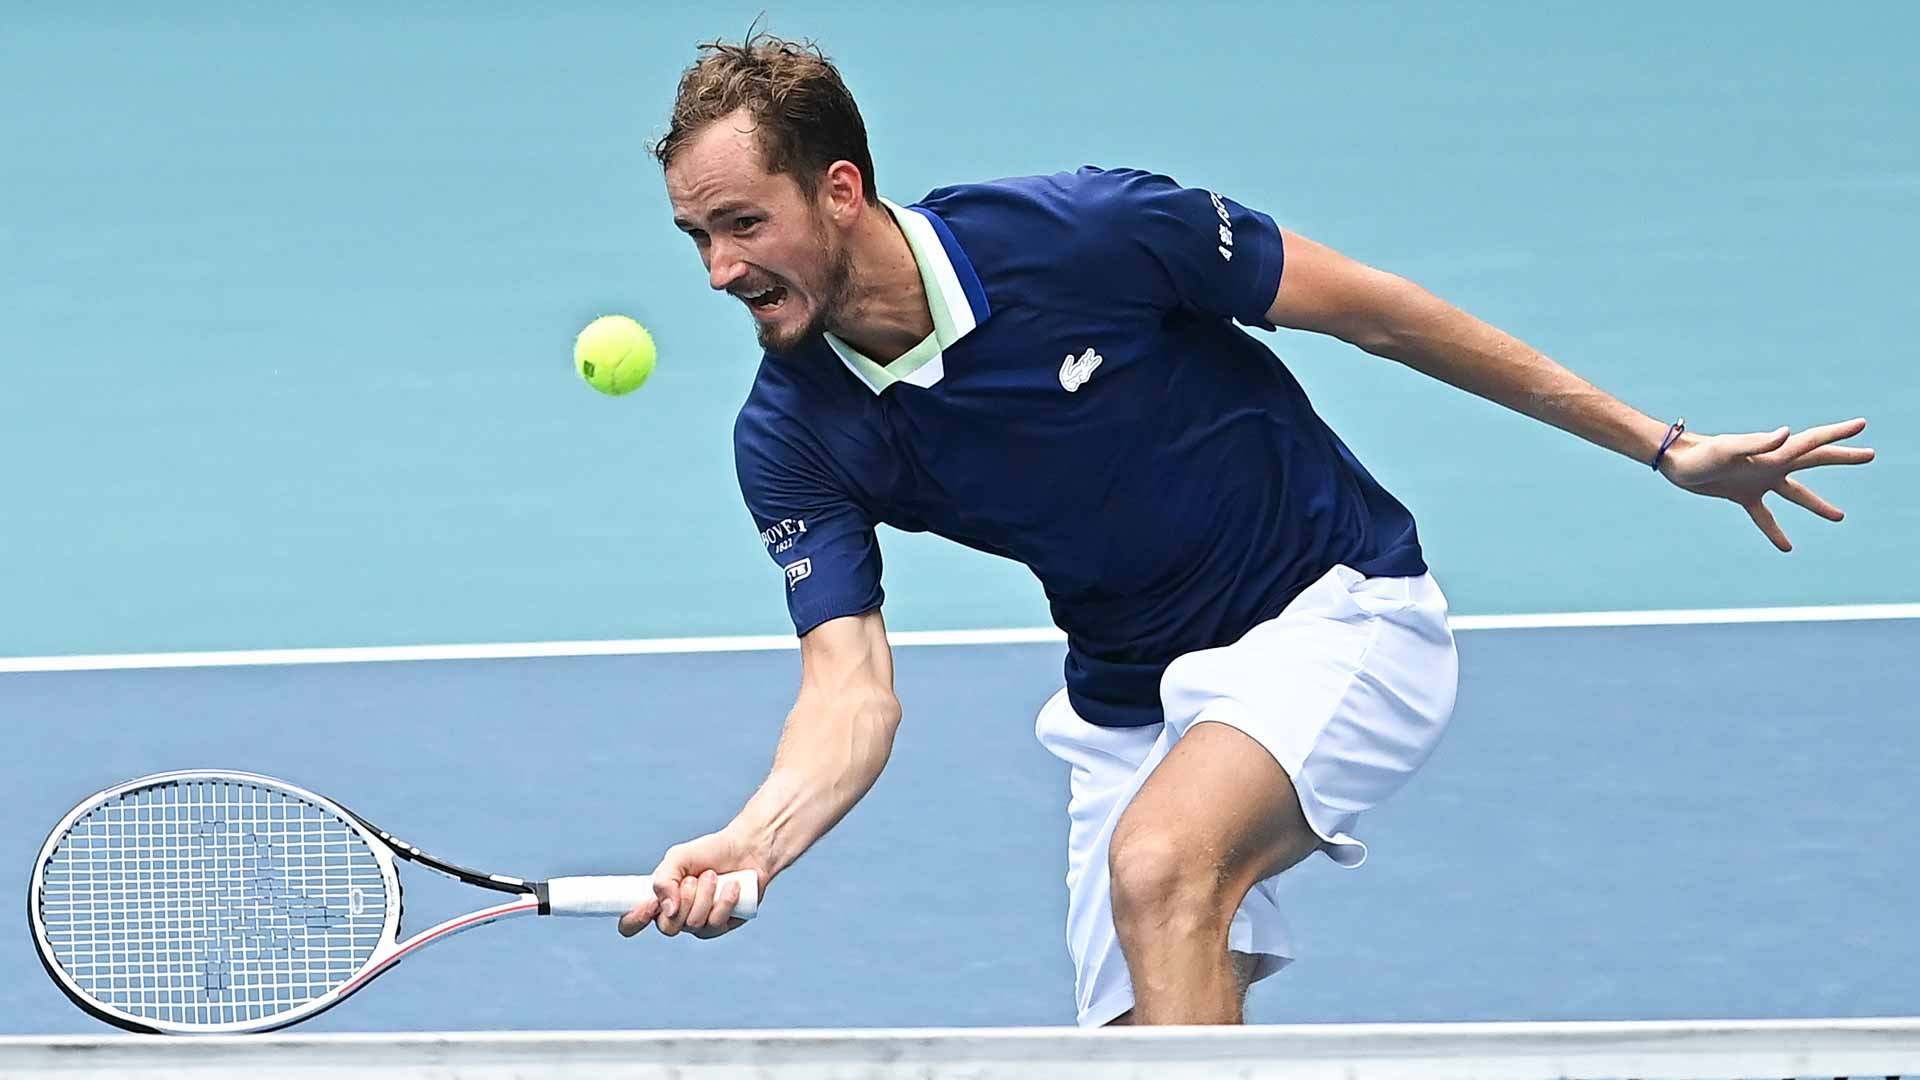 Daniil Medvedev will make his fourth appearance at the ATP 500 in Washington, D.C.